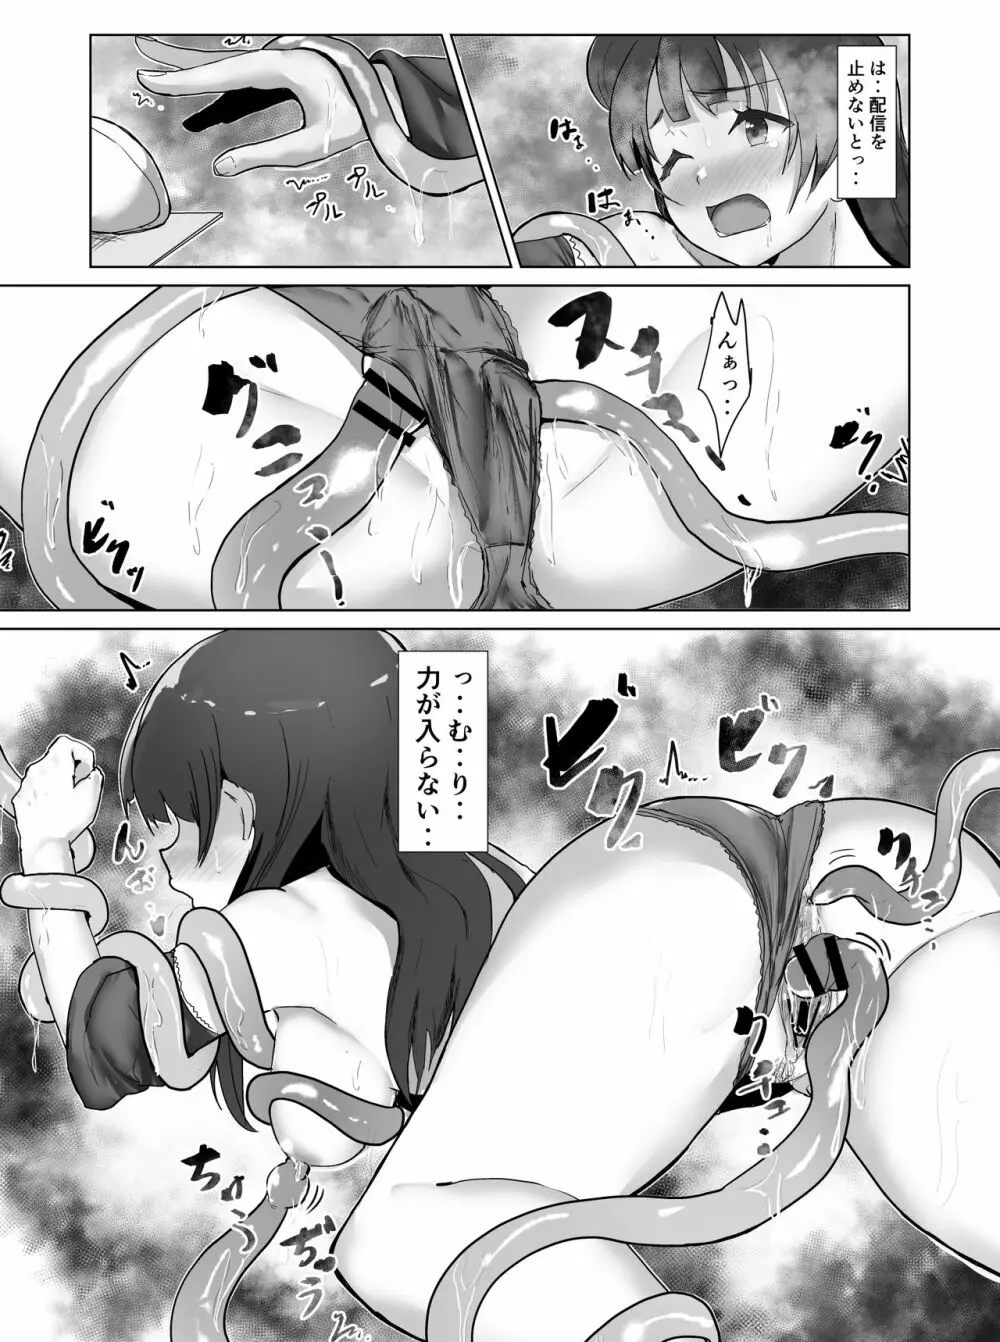 e-rn fanbox short love live doujinshi collection - page86